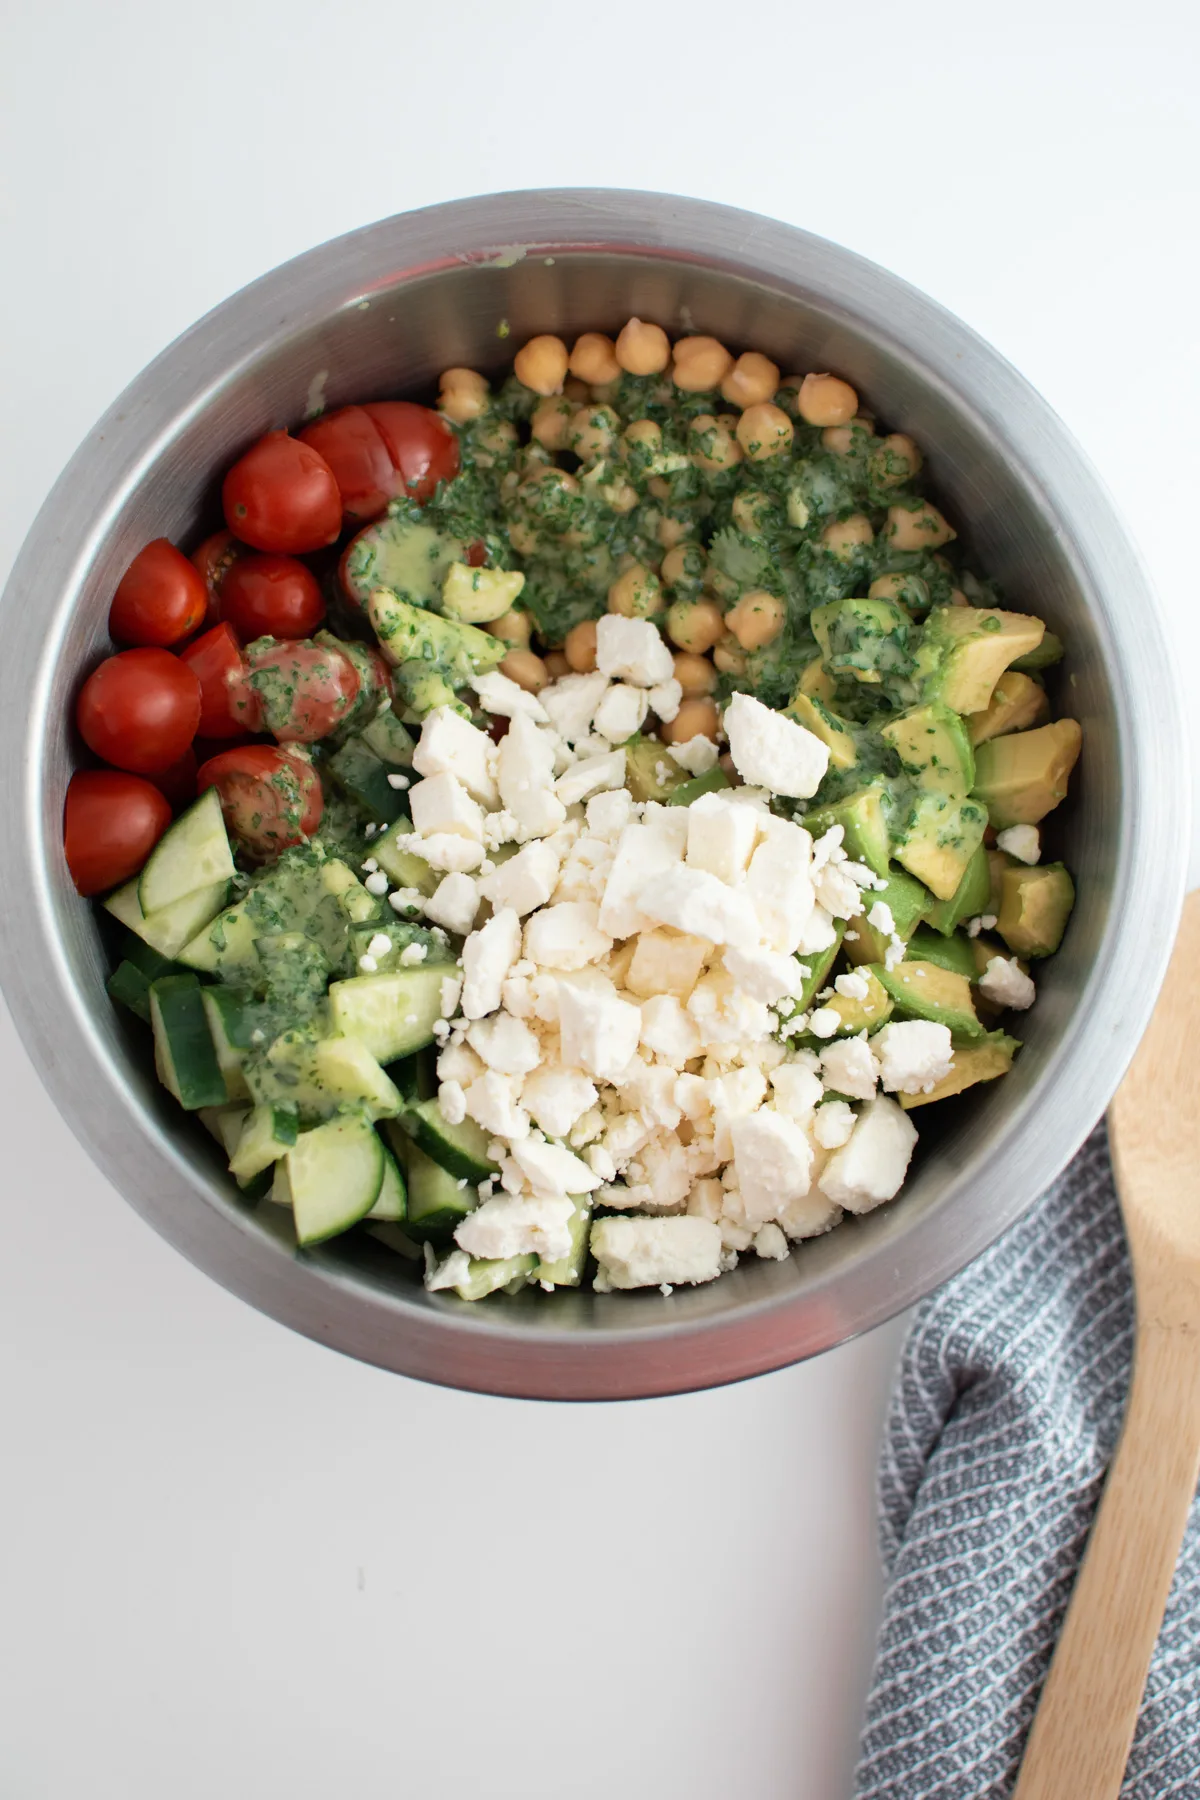 Feta cheese in chickpea salad with tomatoes, cucumber and avocado in mixing bowl.